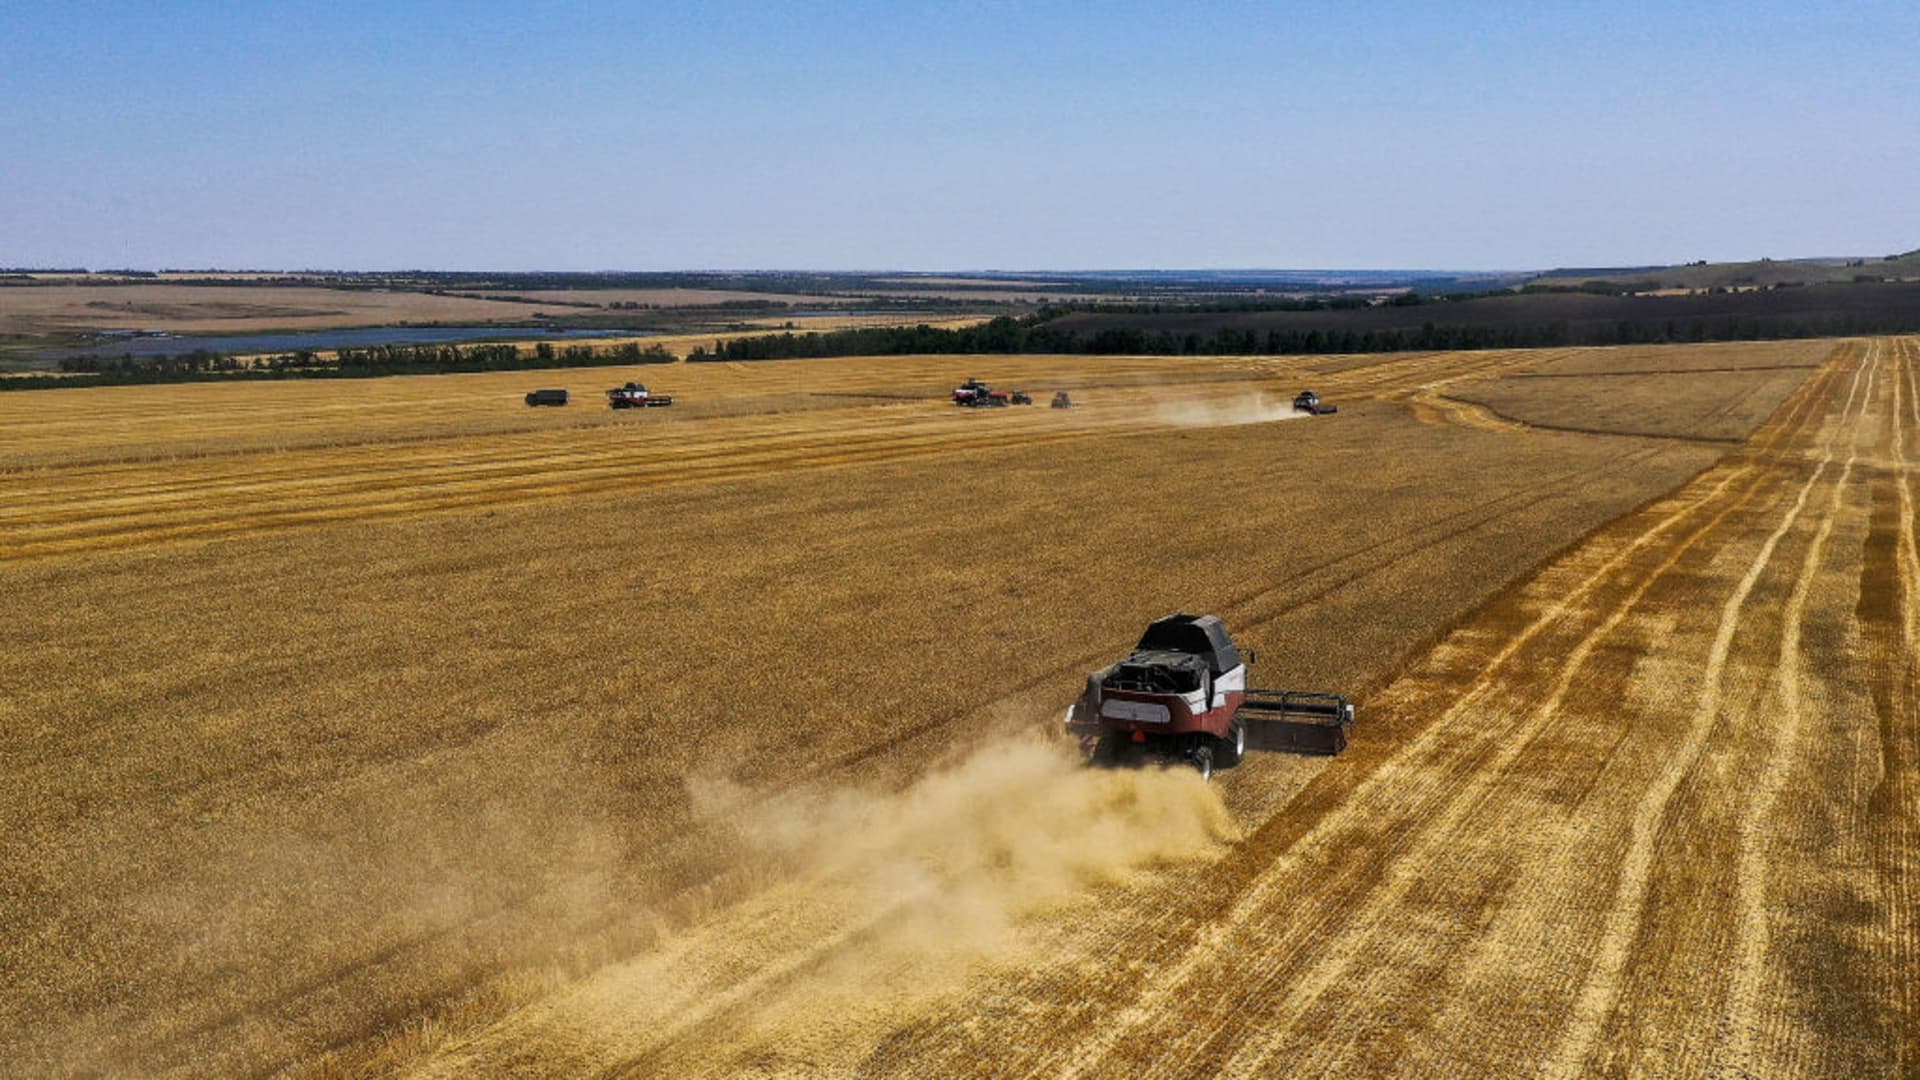 Wheat prices surge after Russia axes grain deal. And it’s not good news for the world’s food supply